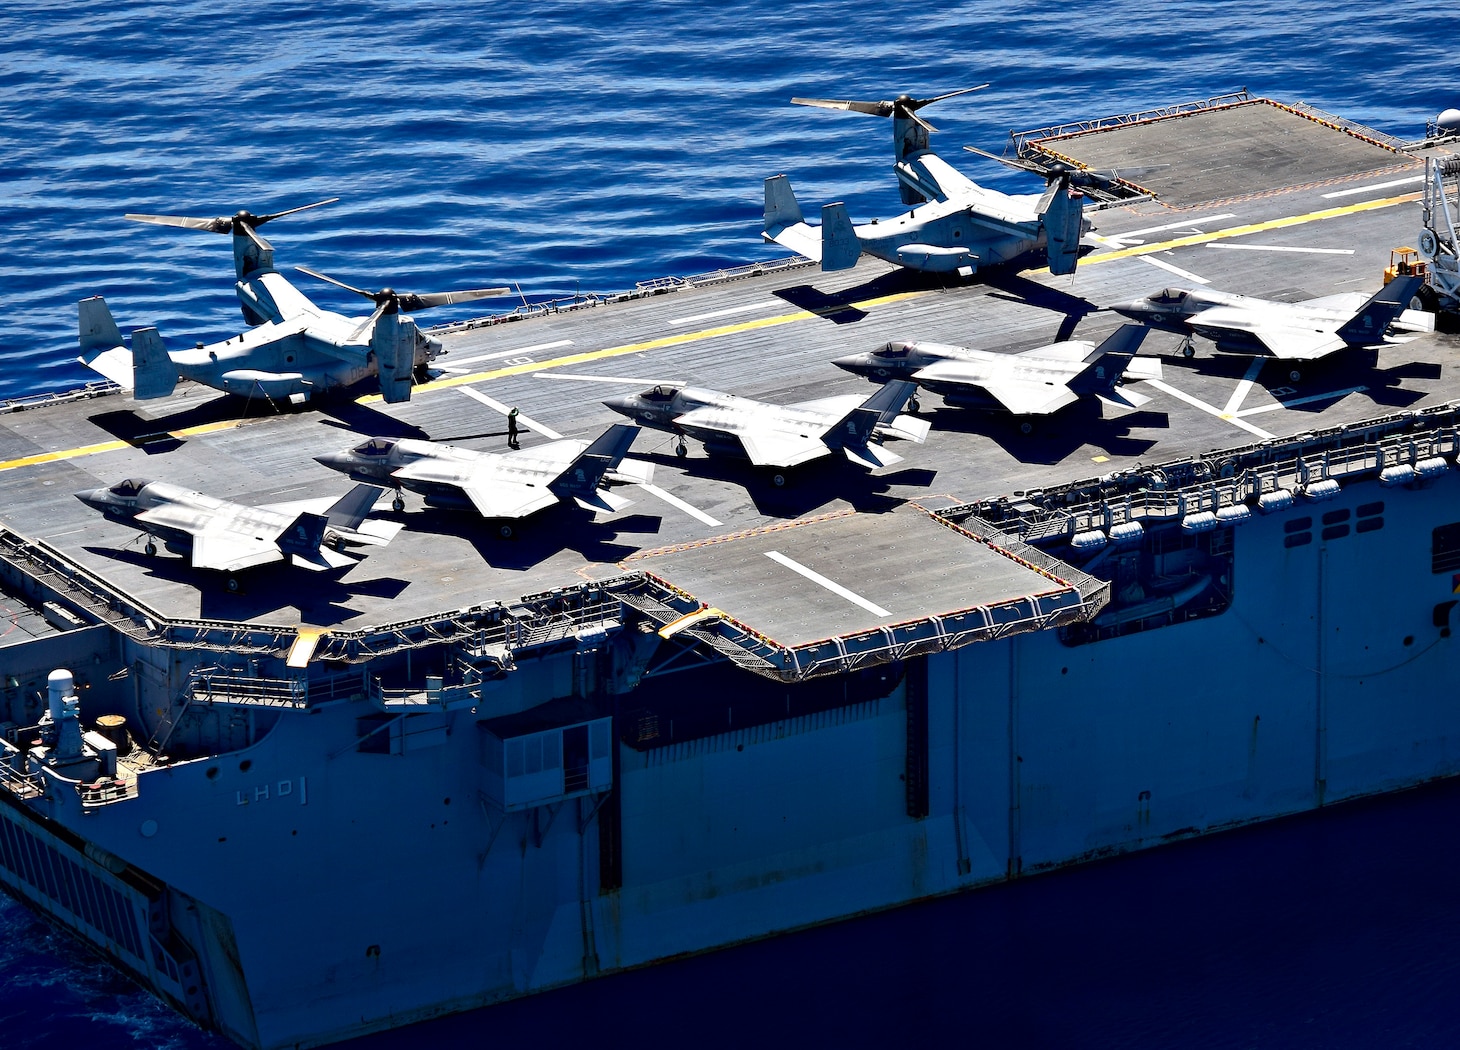 SOUTH CHINA SEA (March 29, 2019) F-35B Lightning II aircraft, assigned to Marine Fighter Attack Squadron (VMFA) 121, and MV-22 Osprey, assigned to Marine Medium Tiltrotor Squadron (VMM) 268, are secured to the flight deck aboard the amphibious assault ship USS Wasp (LHD 1). Wasp, flagship of Wasp Amphibious Ready Group, is operating in the Indo-Pacific region to enhance interoperability with partners and serve as a lethal, ready-response force for any type of contingency.